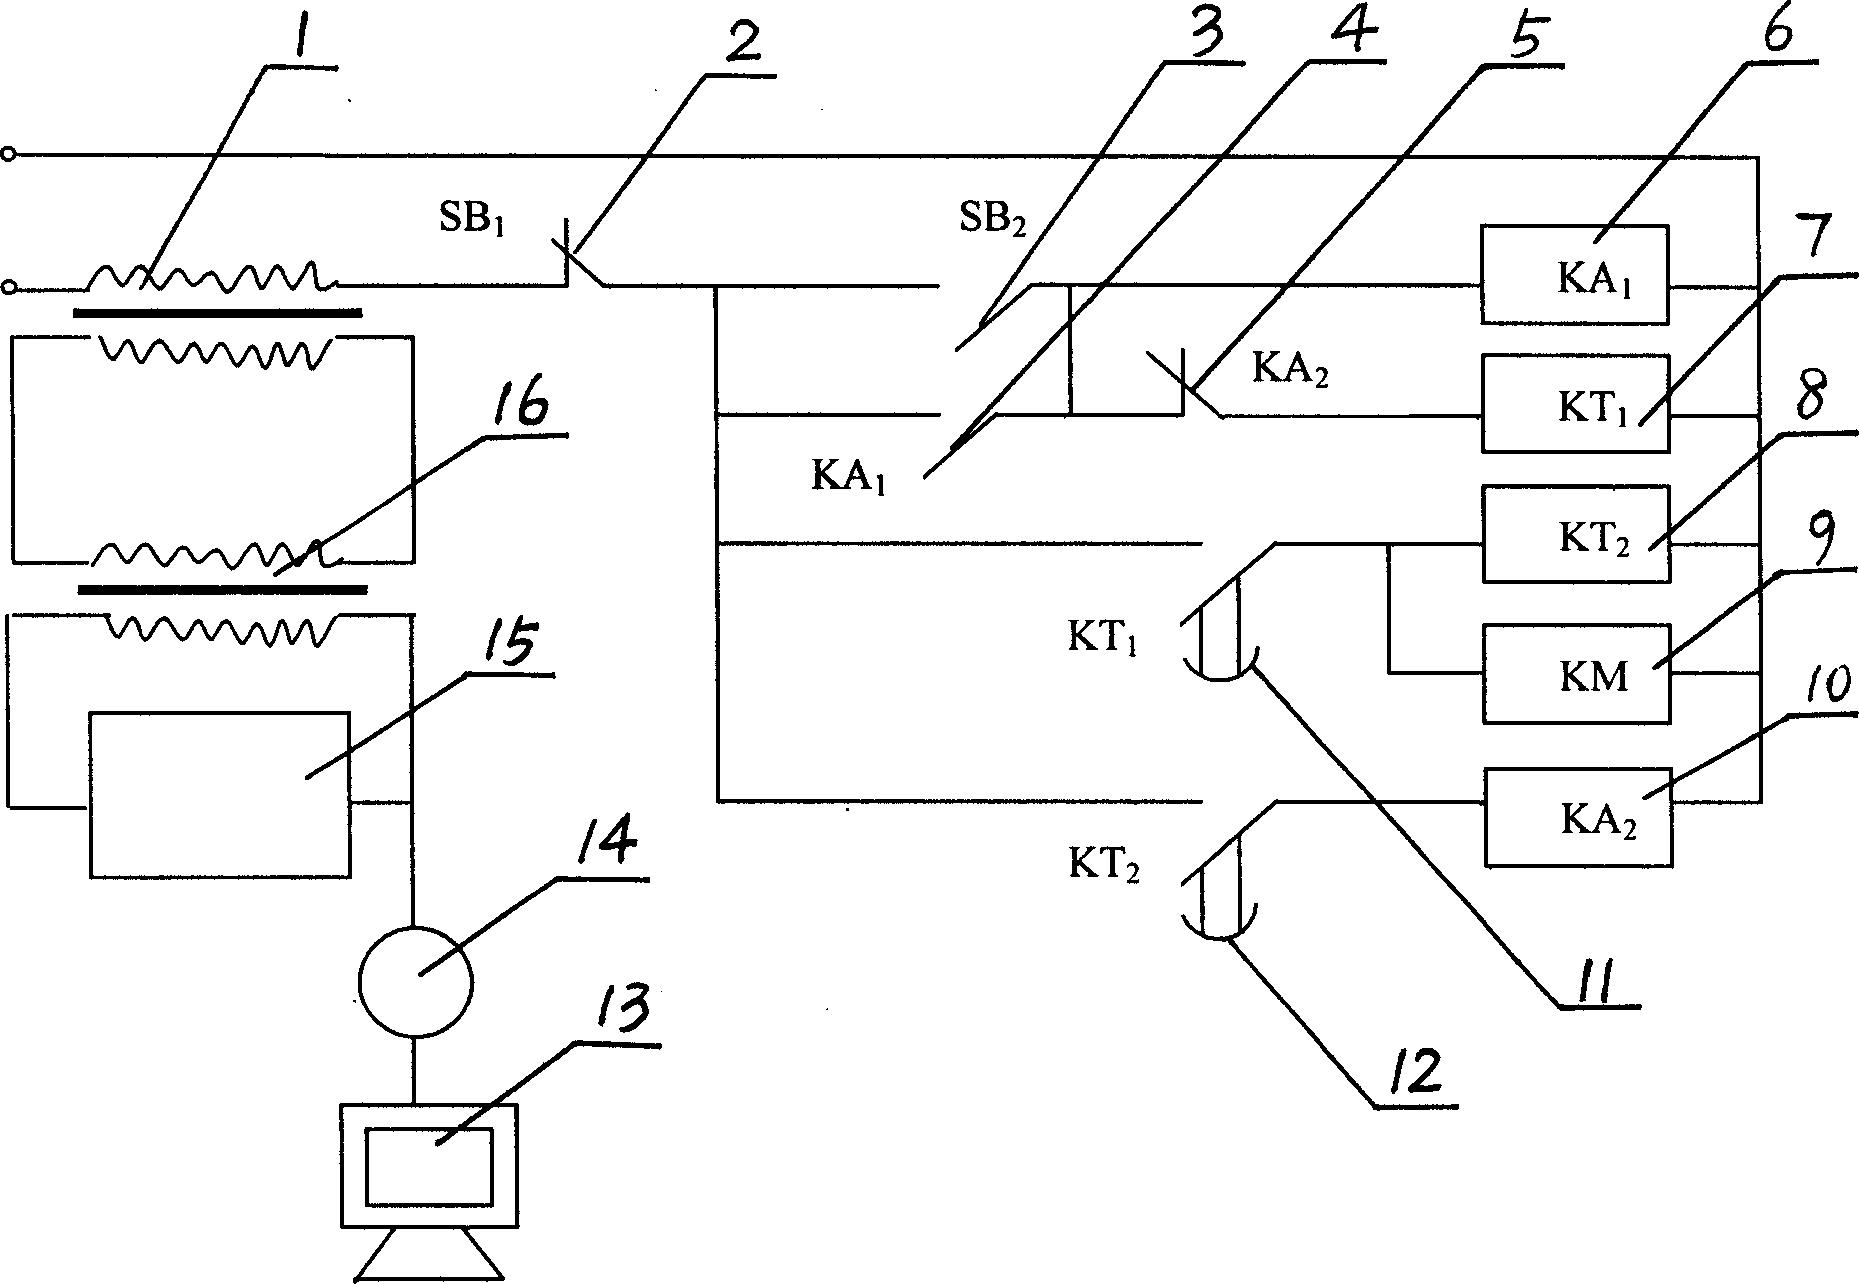 Method and device for preparing metal-based composite material by electric current direct heating dynamic sinter hot pressing